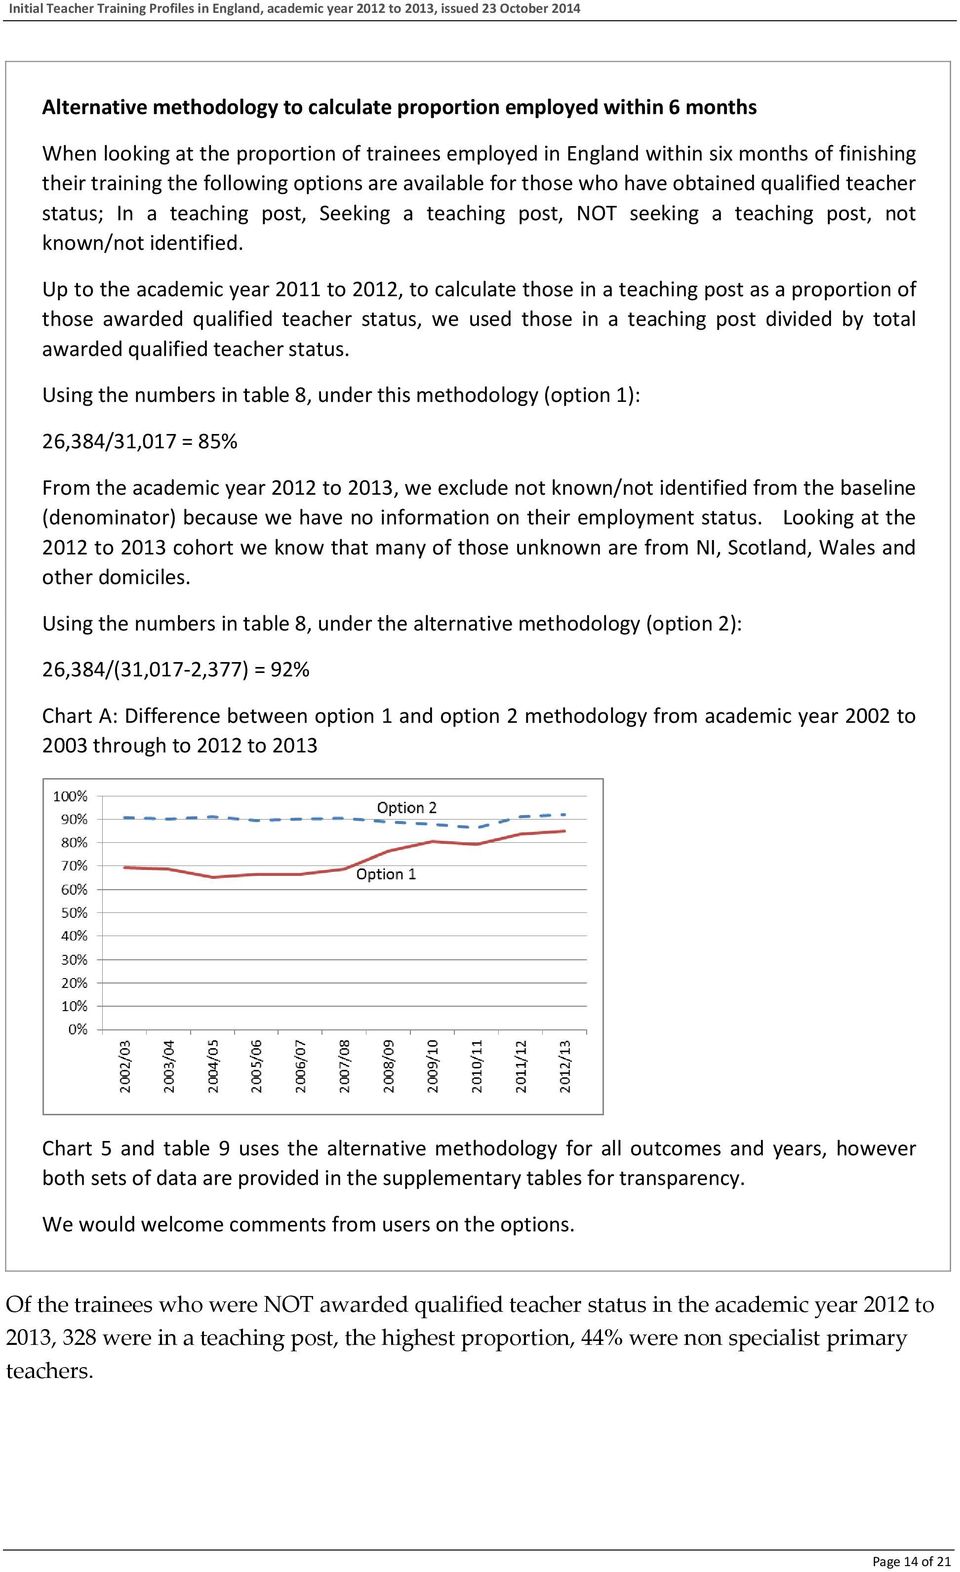 Up to the academic year 2011 to 2012, to calculate those in a teaching post as a proportion of those awarded qualified teacher status, we used those in a teaching post divided by total awarded